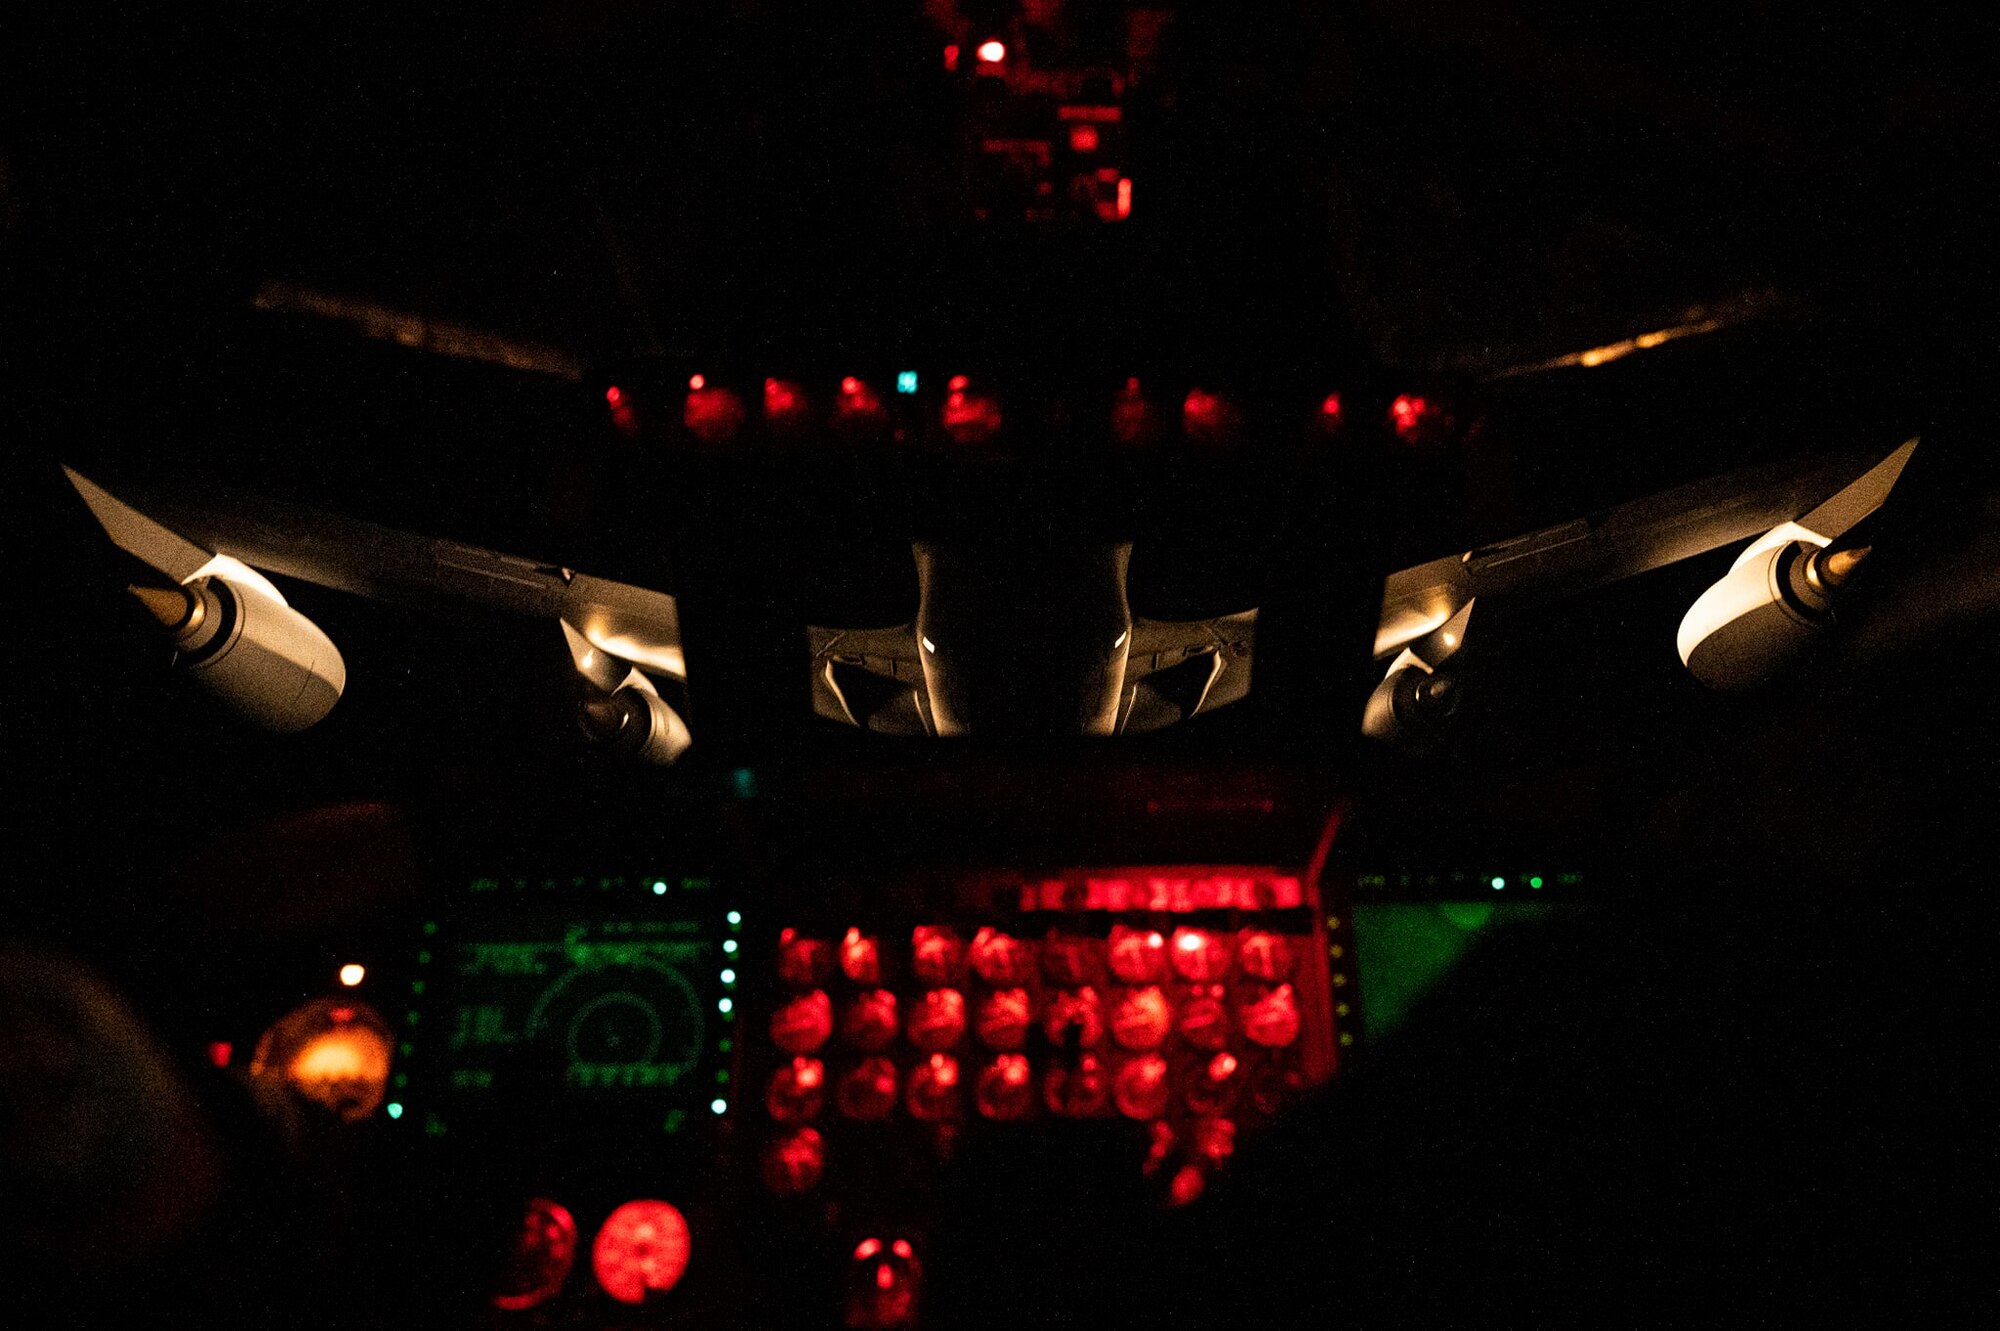 U.S. Air Force B-52H Stratofortress aircrew members assigned to the 20th Bomb Squadron, Barksdale Air Force Base, Louisiana, conducts in-air refueling for a Bomber Task Force mission, Sep. 8, 2021, over the Indo-Pacific region. The U.S. Air Force is engaged, postured, and ready with credible force to assure, deter, and defend in an increasingly complex security environment. (U.S. Air Force photo by Staff Sgt. Devin M. Rumbaugh)